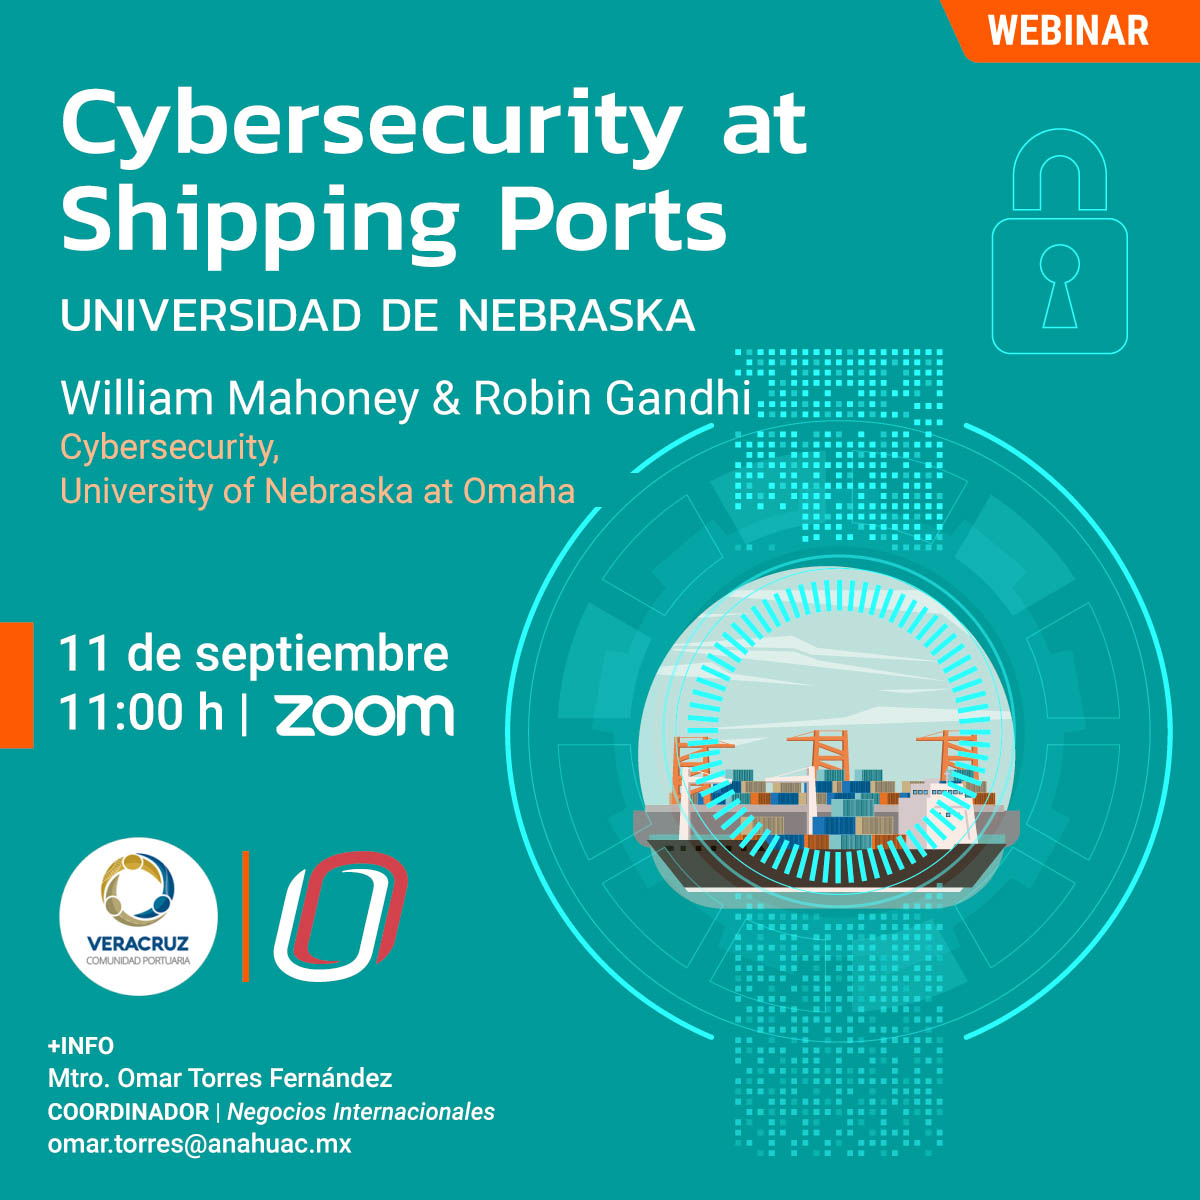 Cybersecurity at Shipping Ports